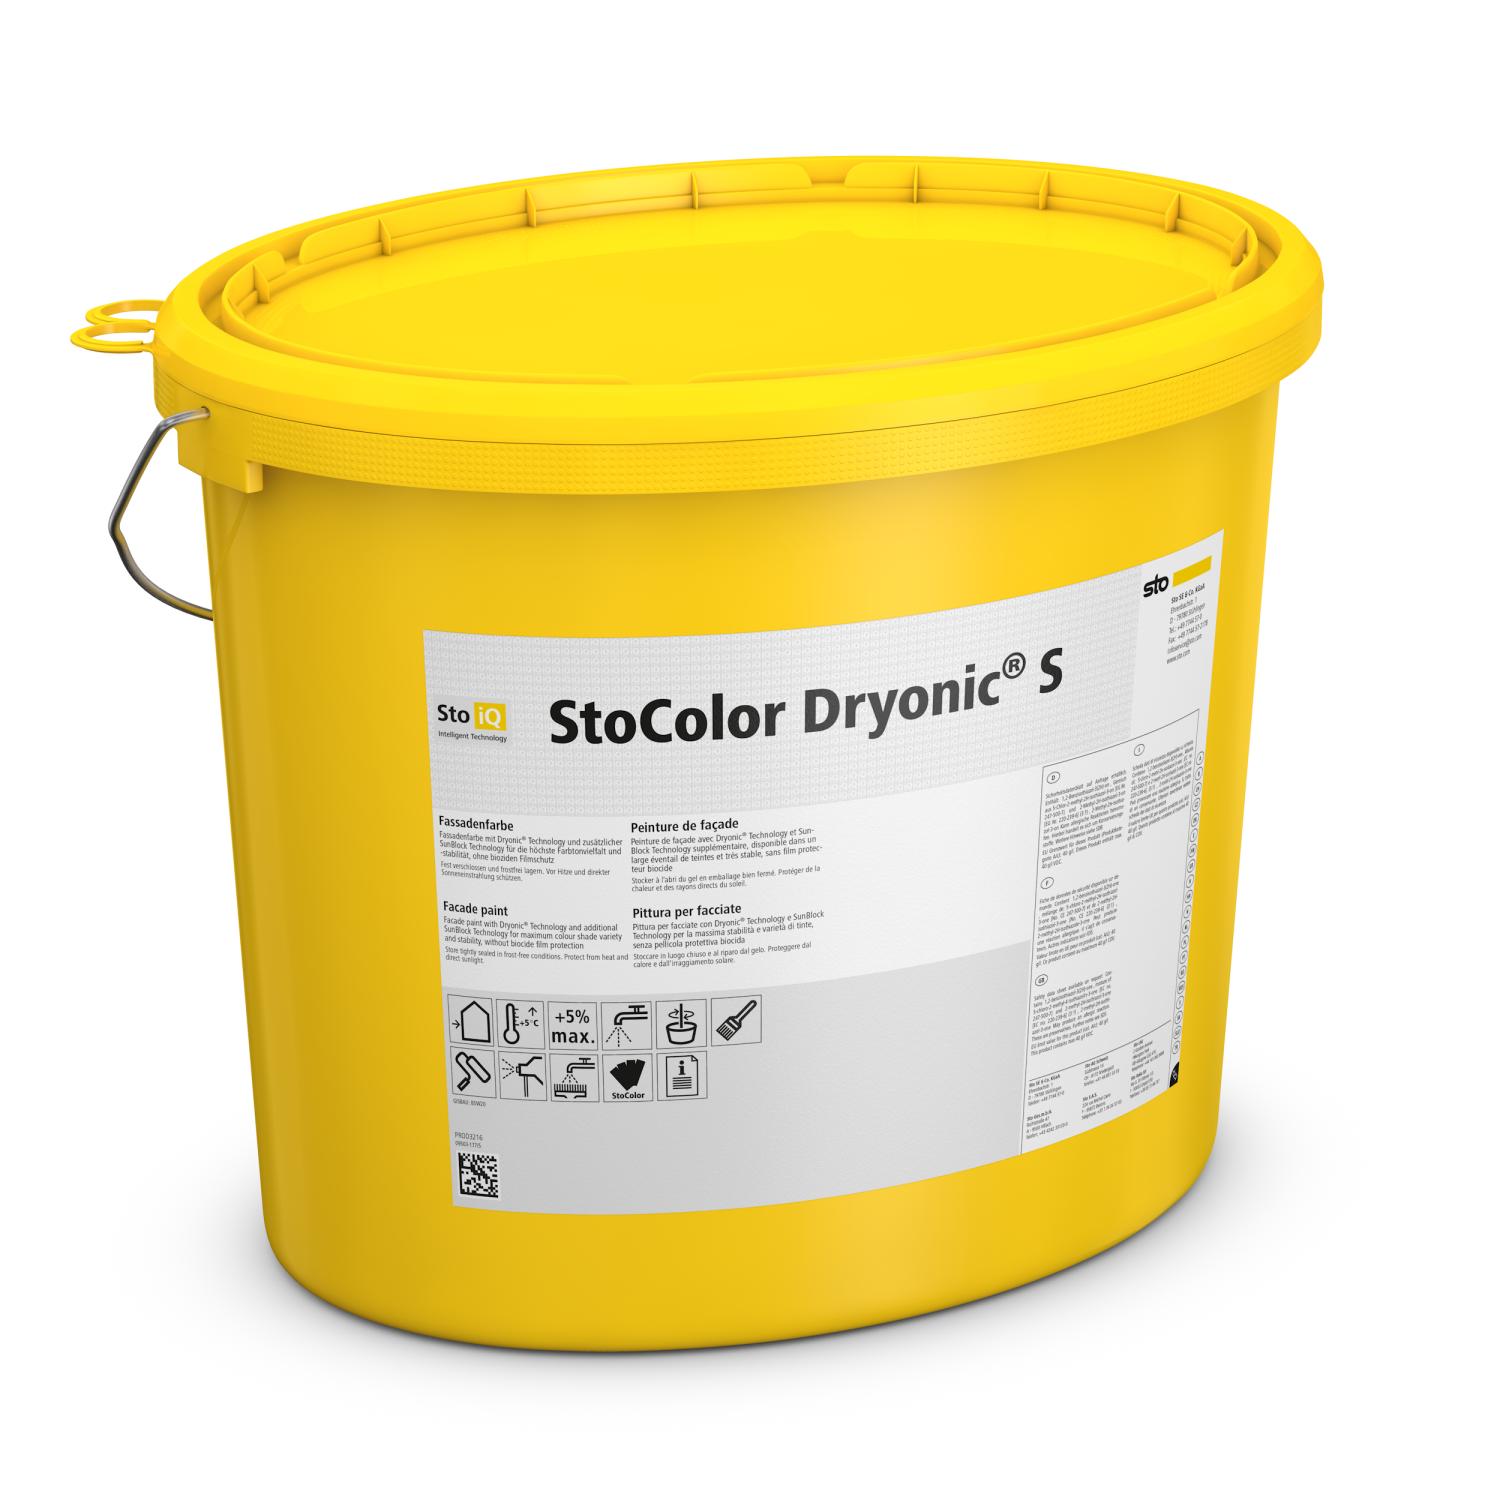 StoColor Dryonic® S